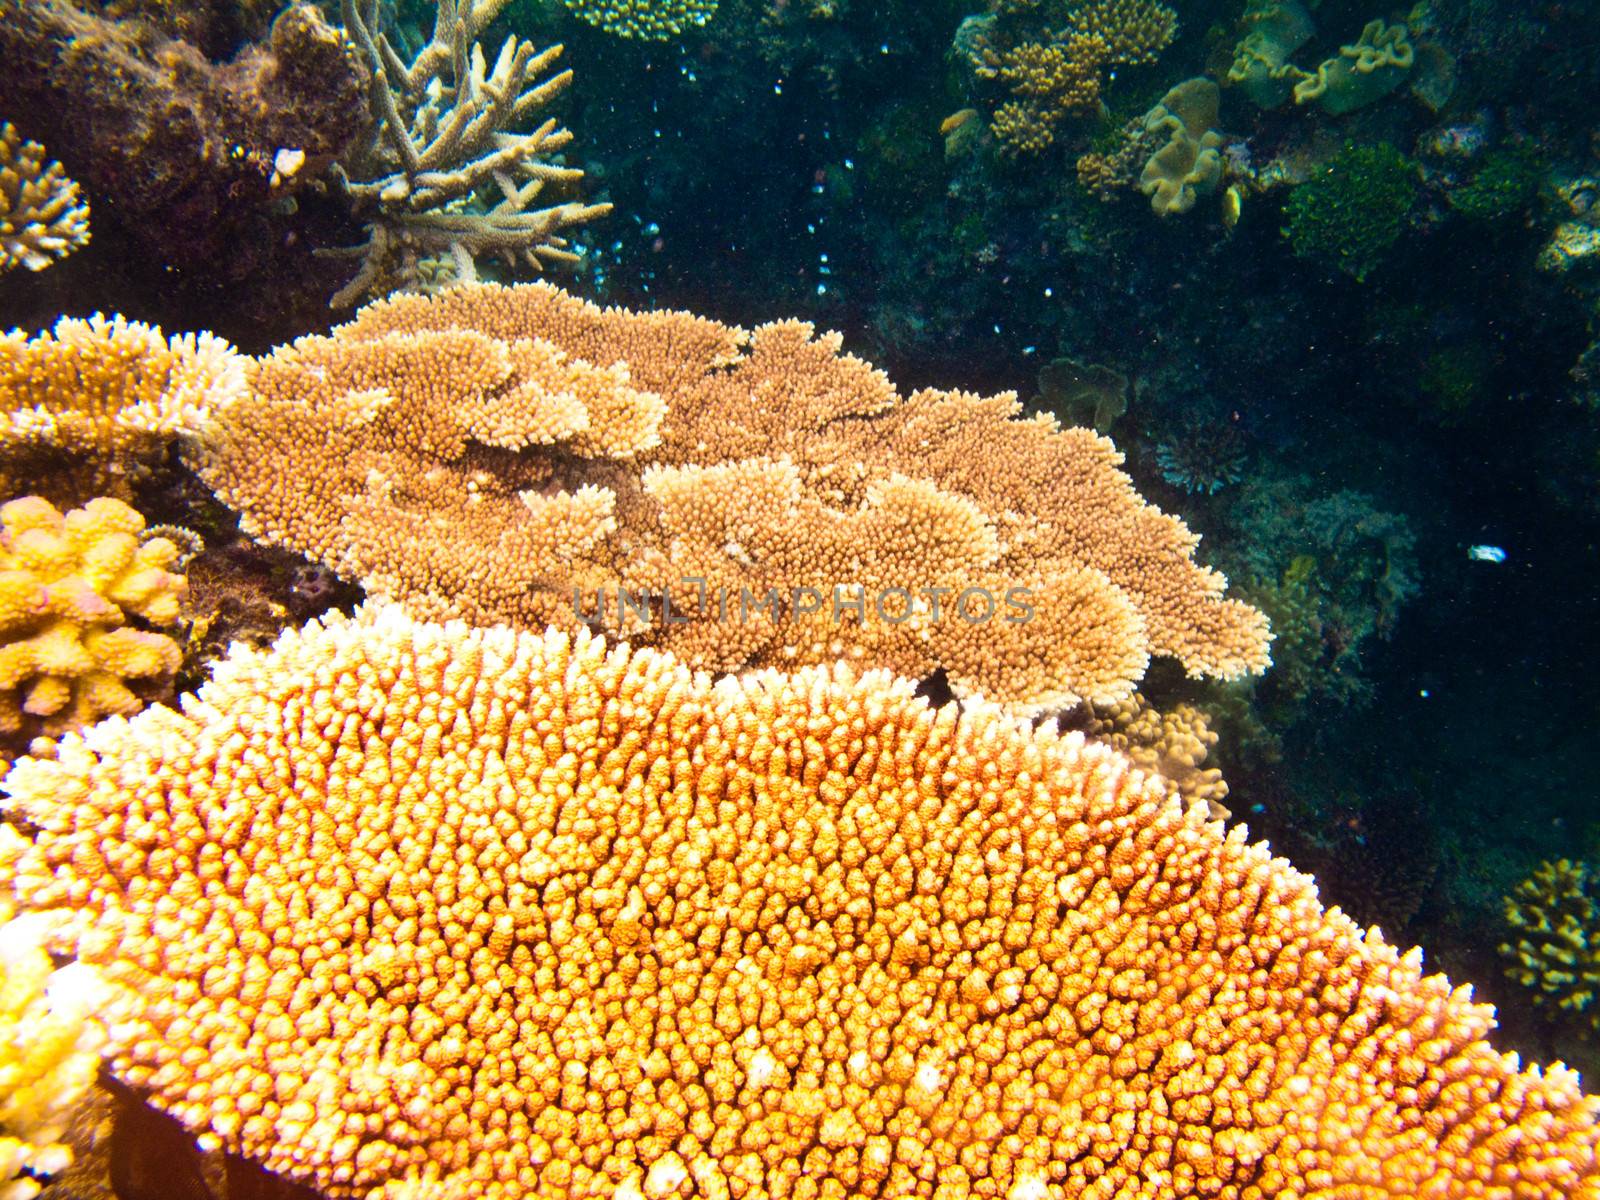 View underwater shot of the coral reef by jrstock